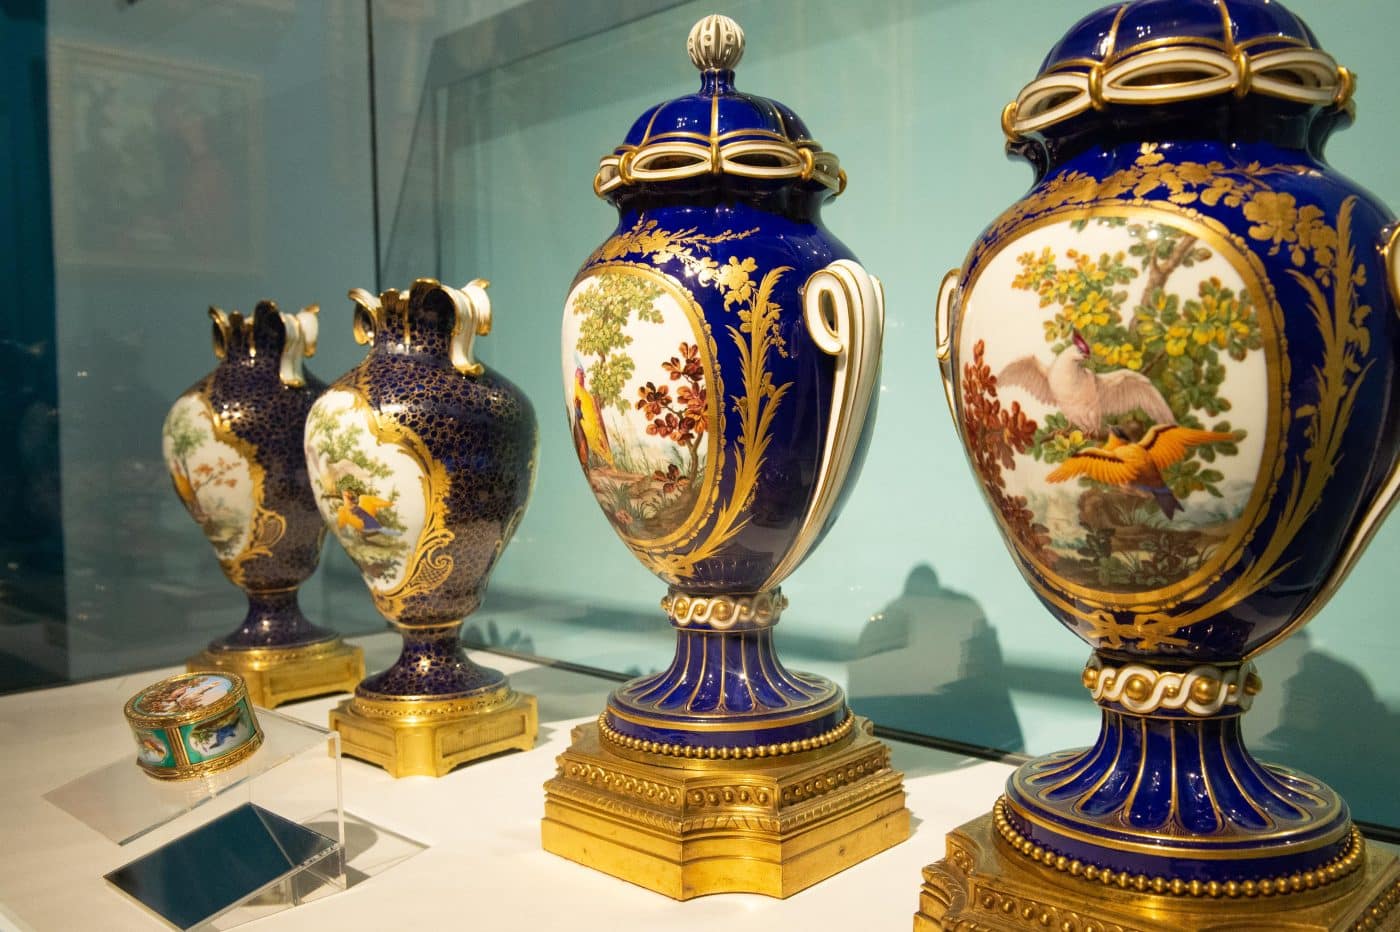 Two pairs of vessels of Sevres porcelain from Waddesdon's collection part of the show "Alice's Wonderlands" about Alice de Rothschild England